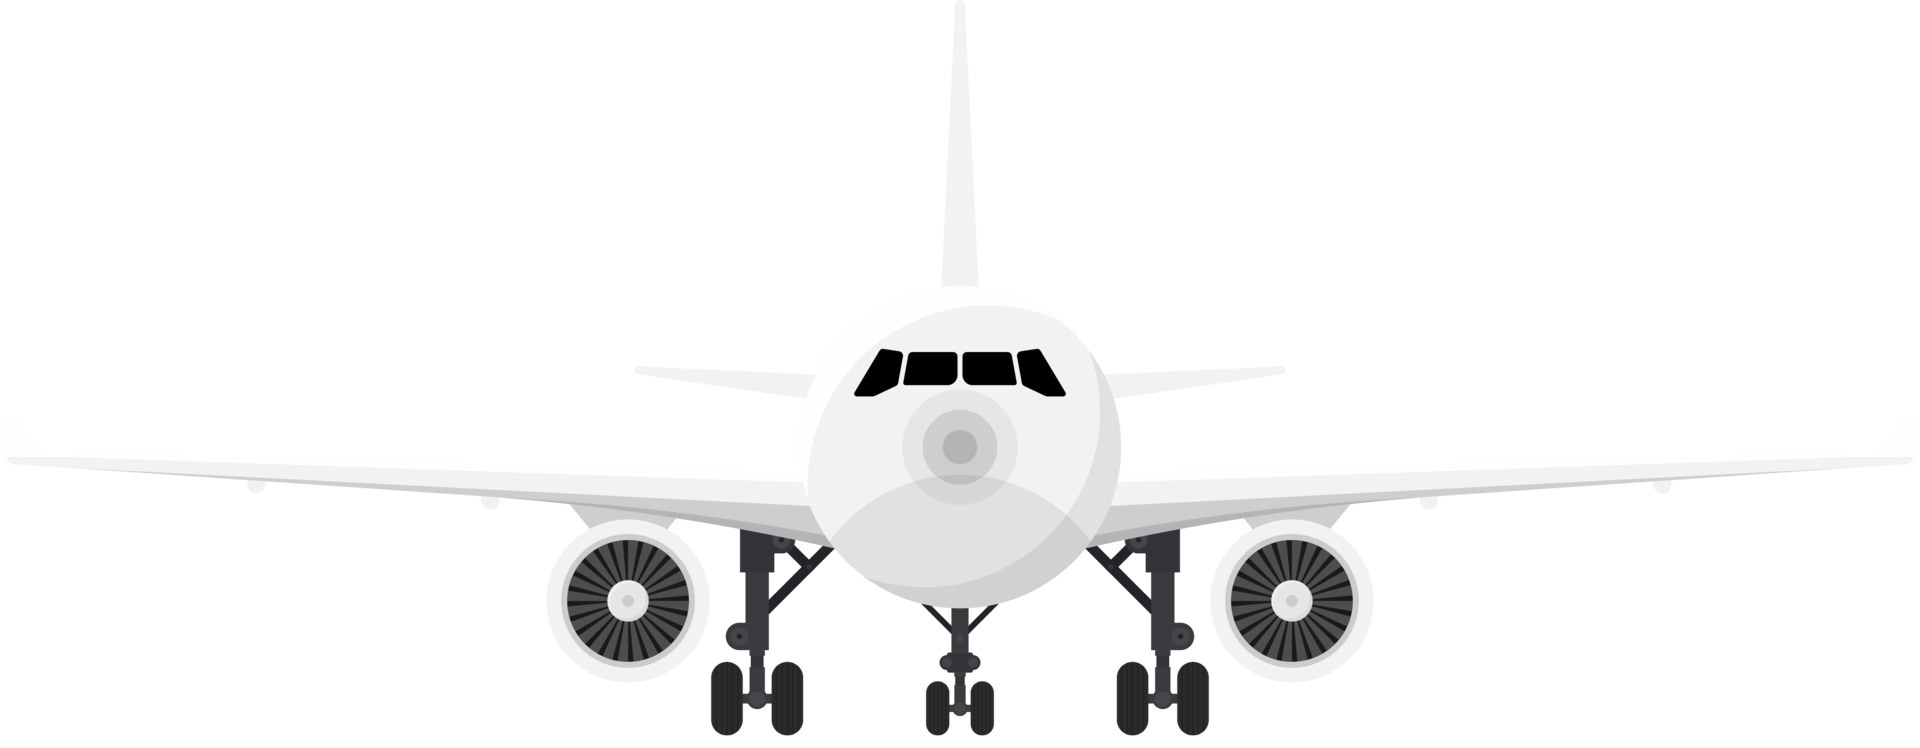 Airplane icon clip art png